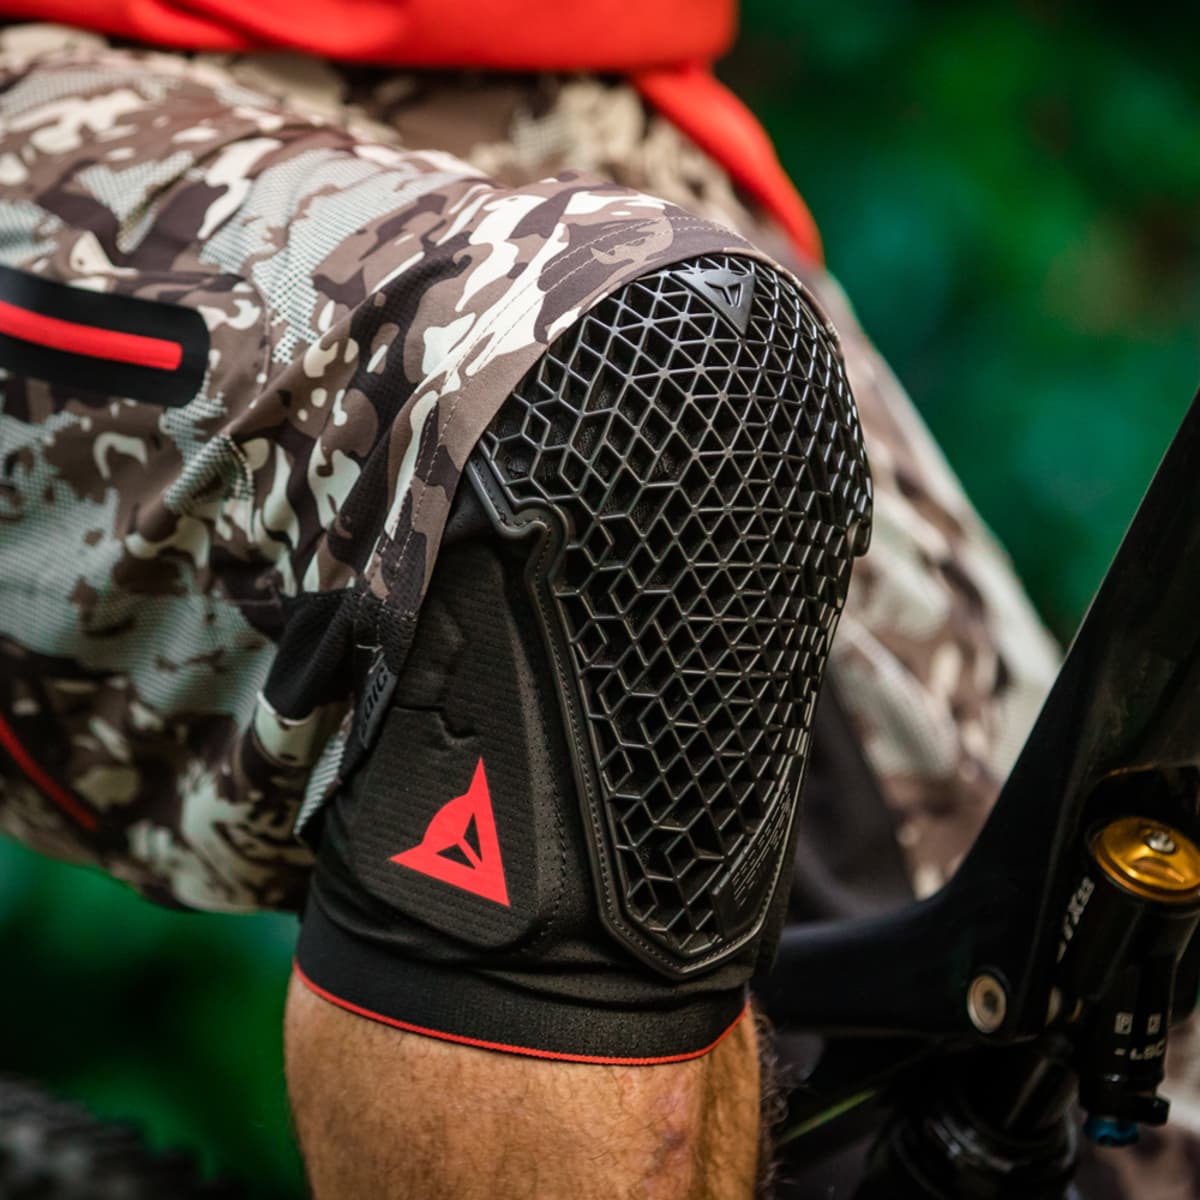 Review: Dainese Trail Skins 2 Knee Pads - BikeMag